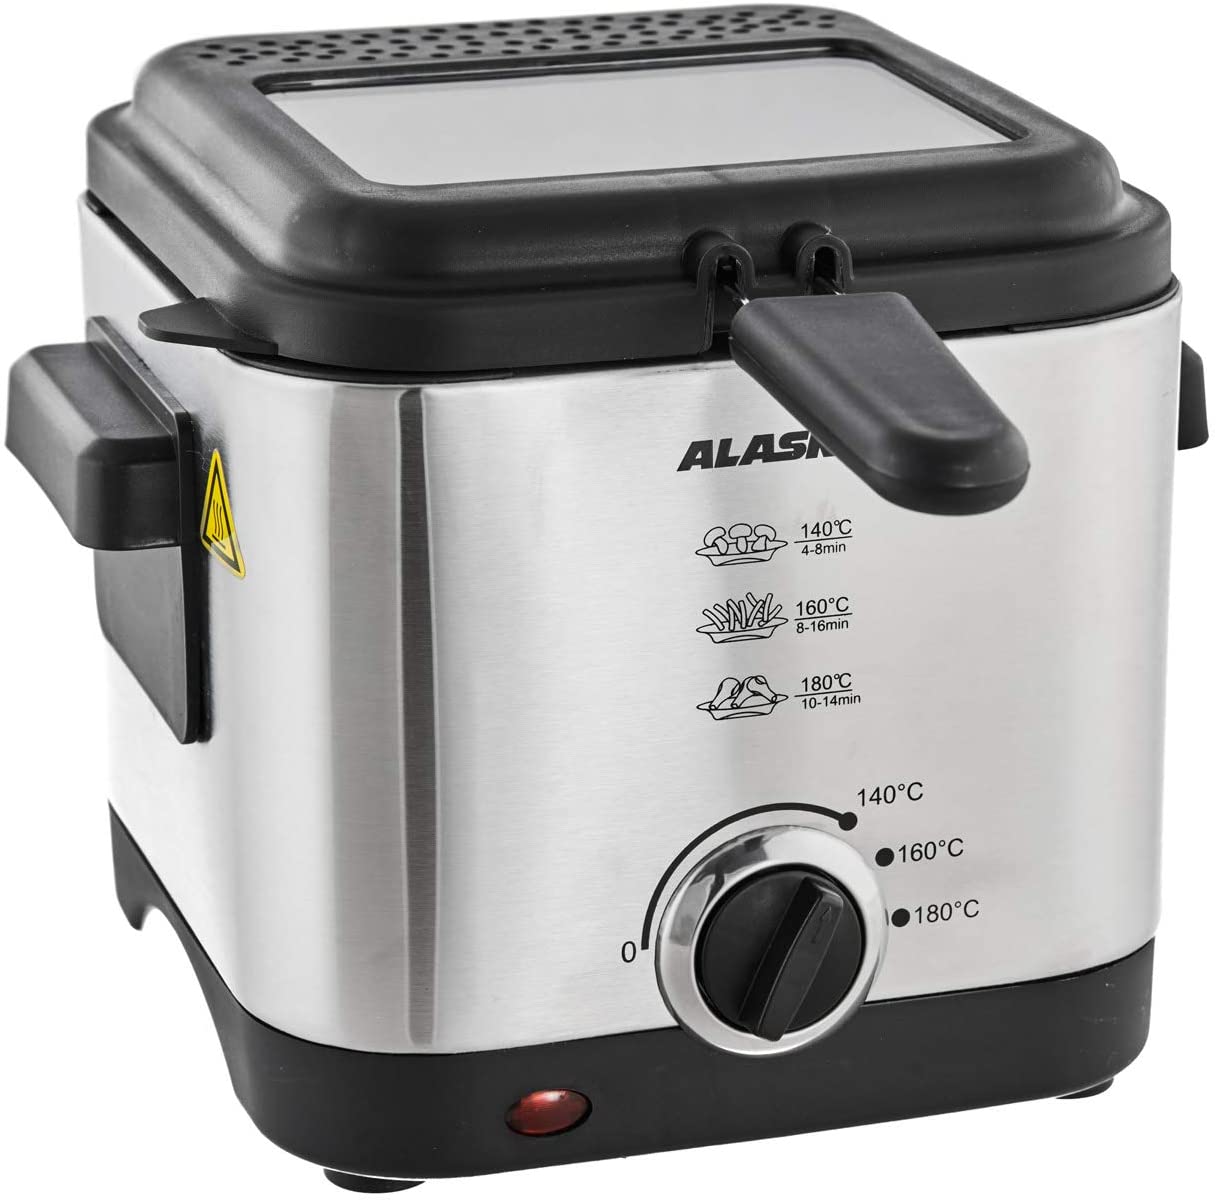 Alaska DF900 Fryer | Stainless Steel Housing | 900 Watt | 1.35 Litre Oil Container | Non-Stick Frying Container | Removable Frying Basket